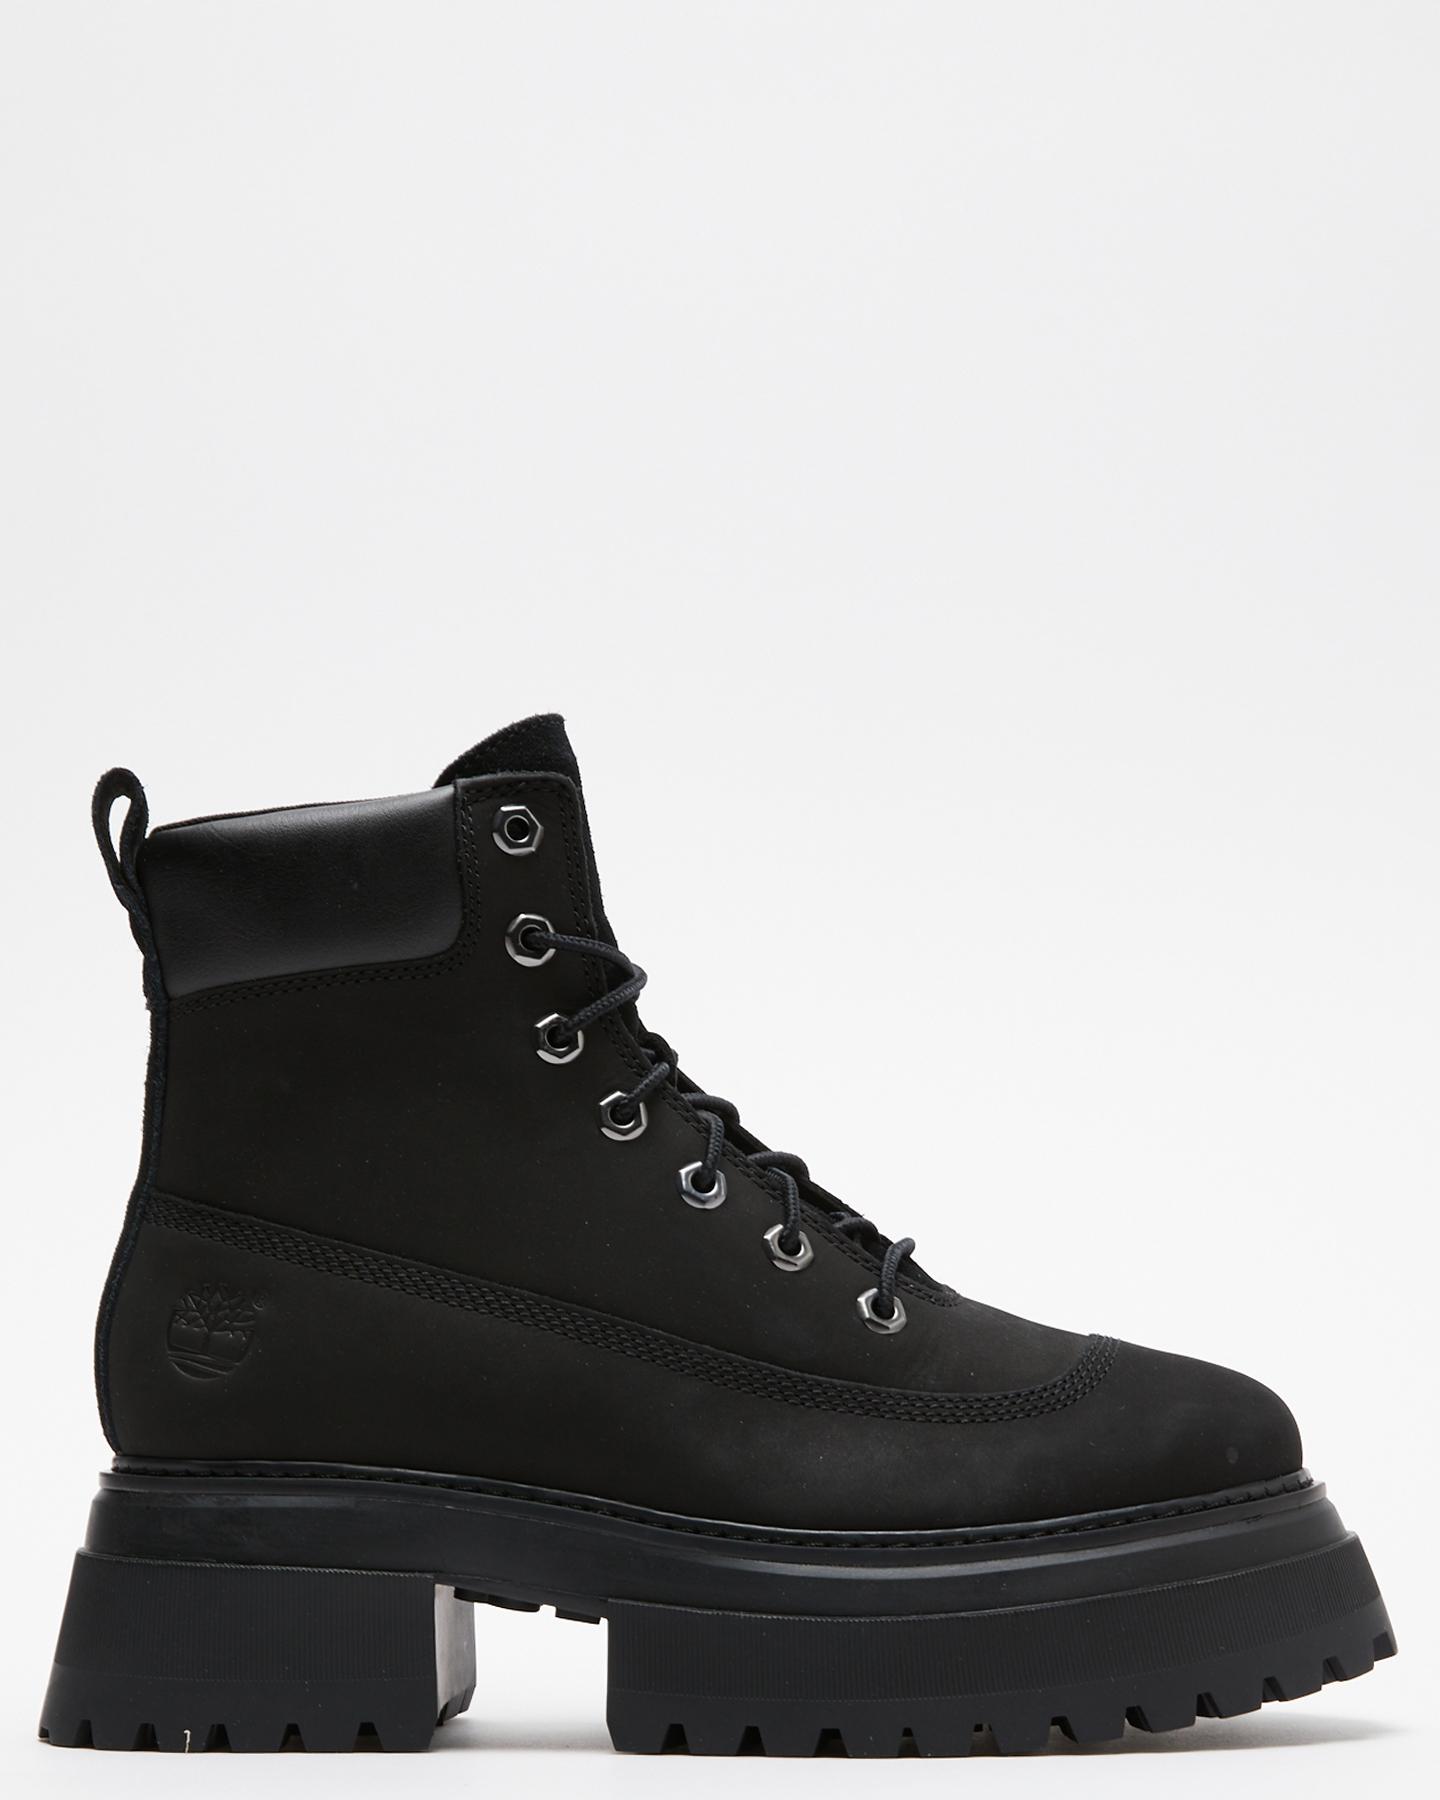 Sky 6In Laceup Boot - Nubuck | SurfStitch